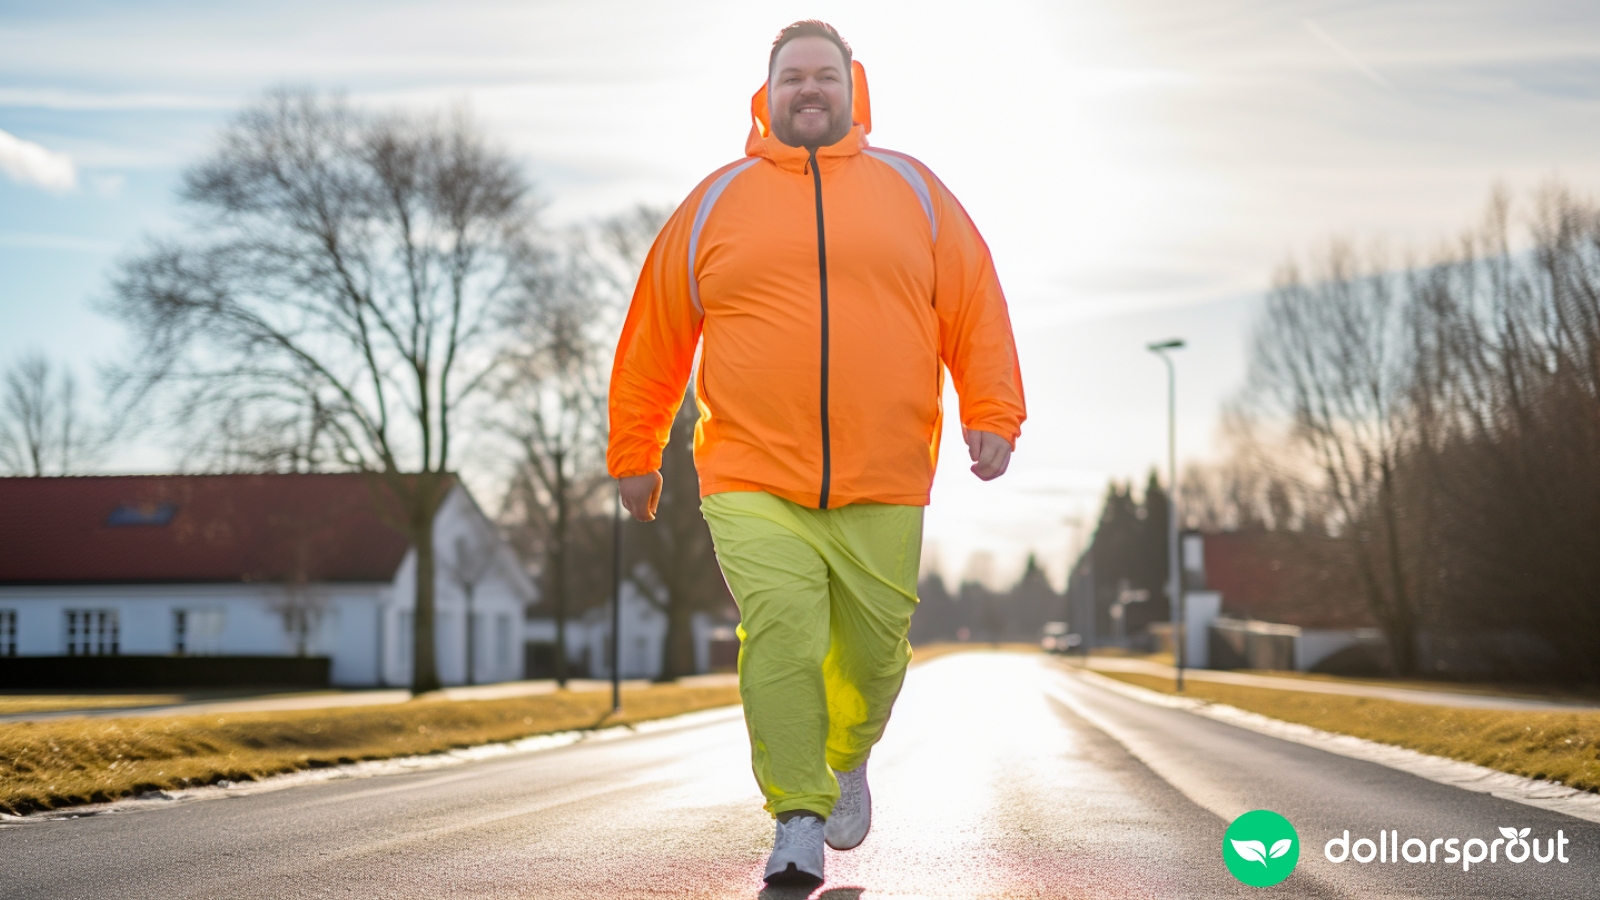 A slightly overweight man in a jogging suit going outside for a run on a cold morning in January.